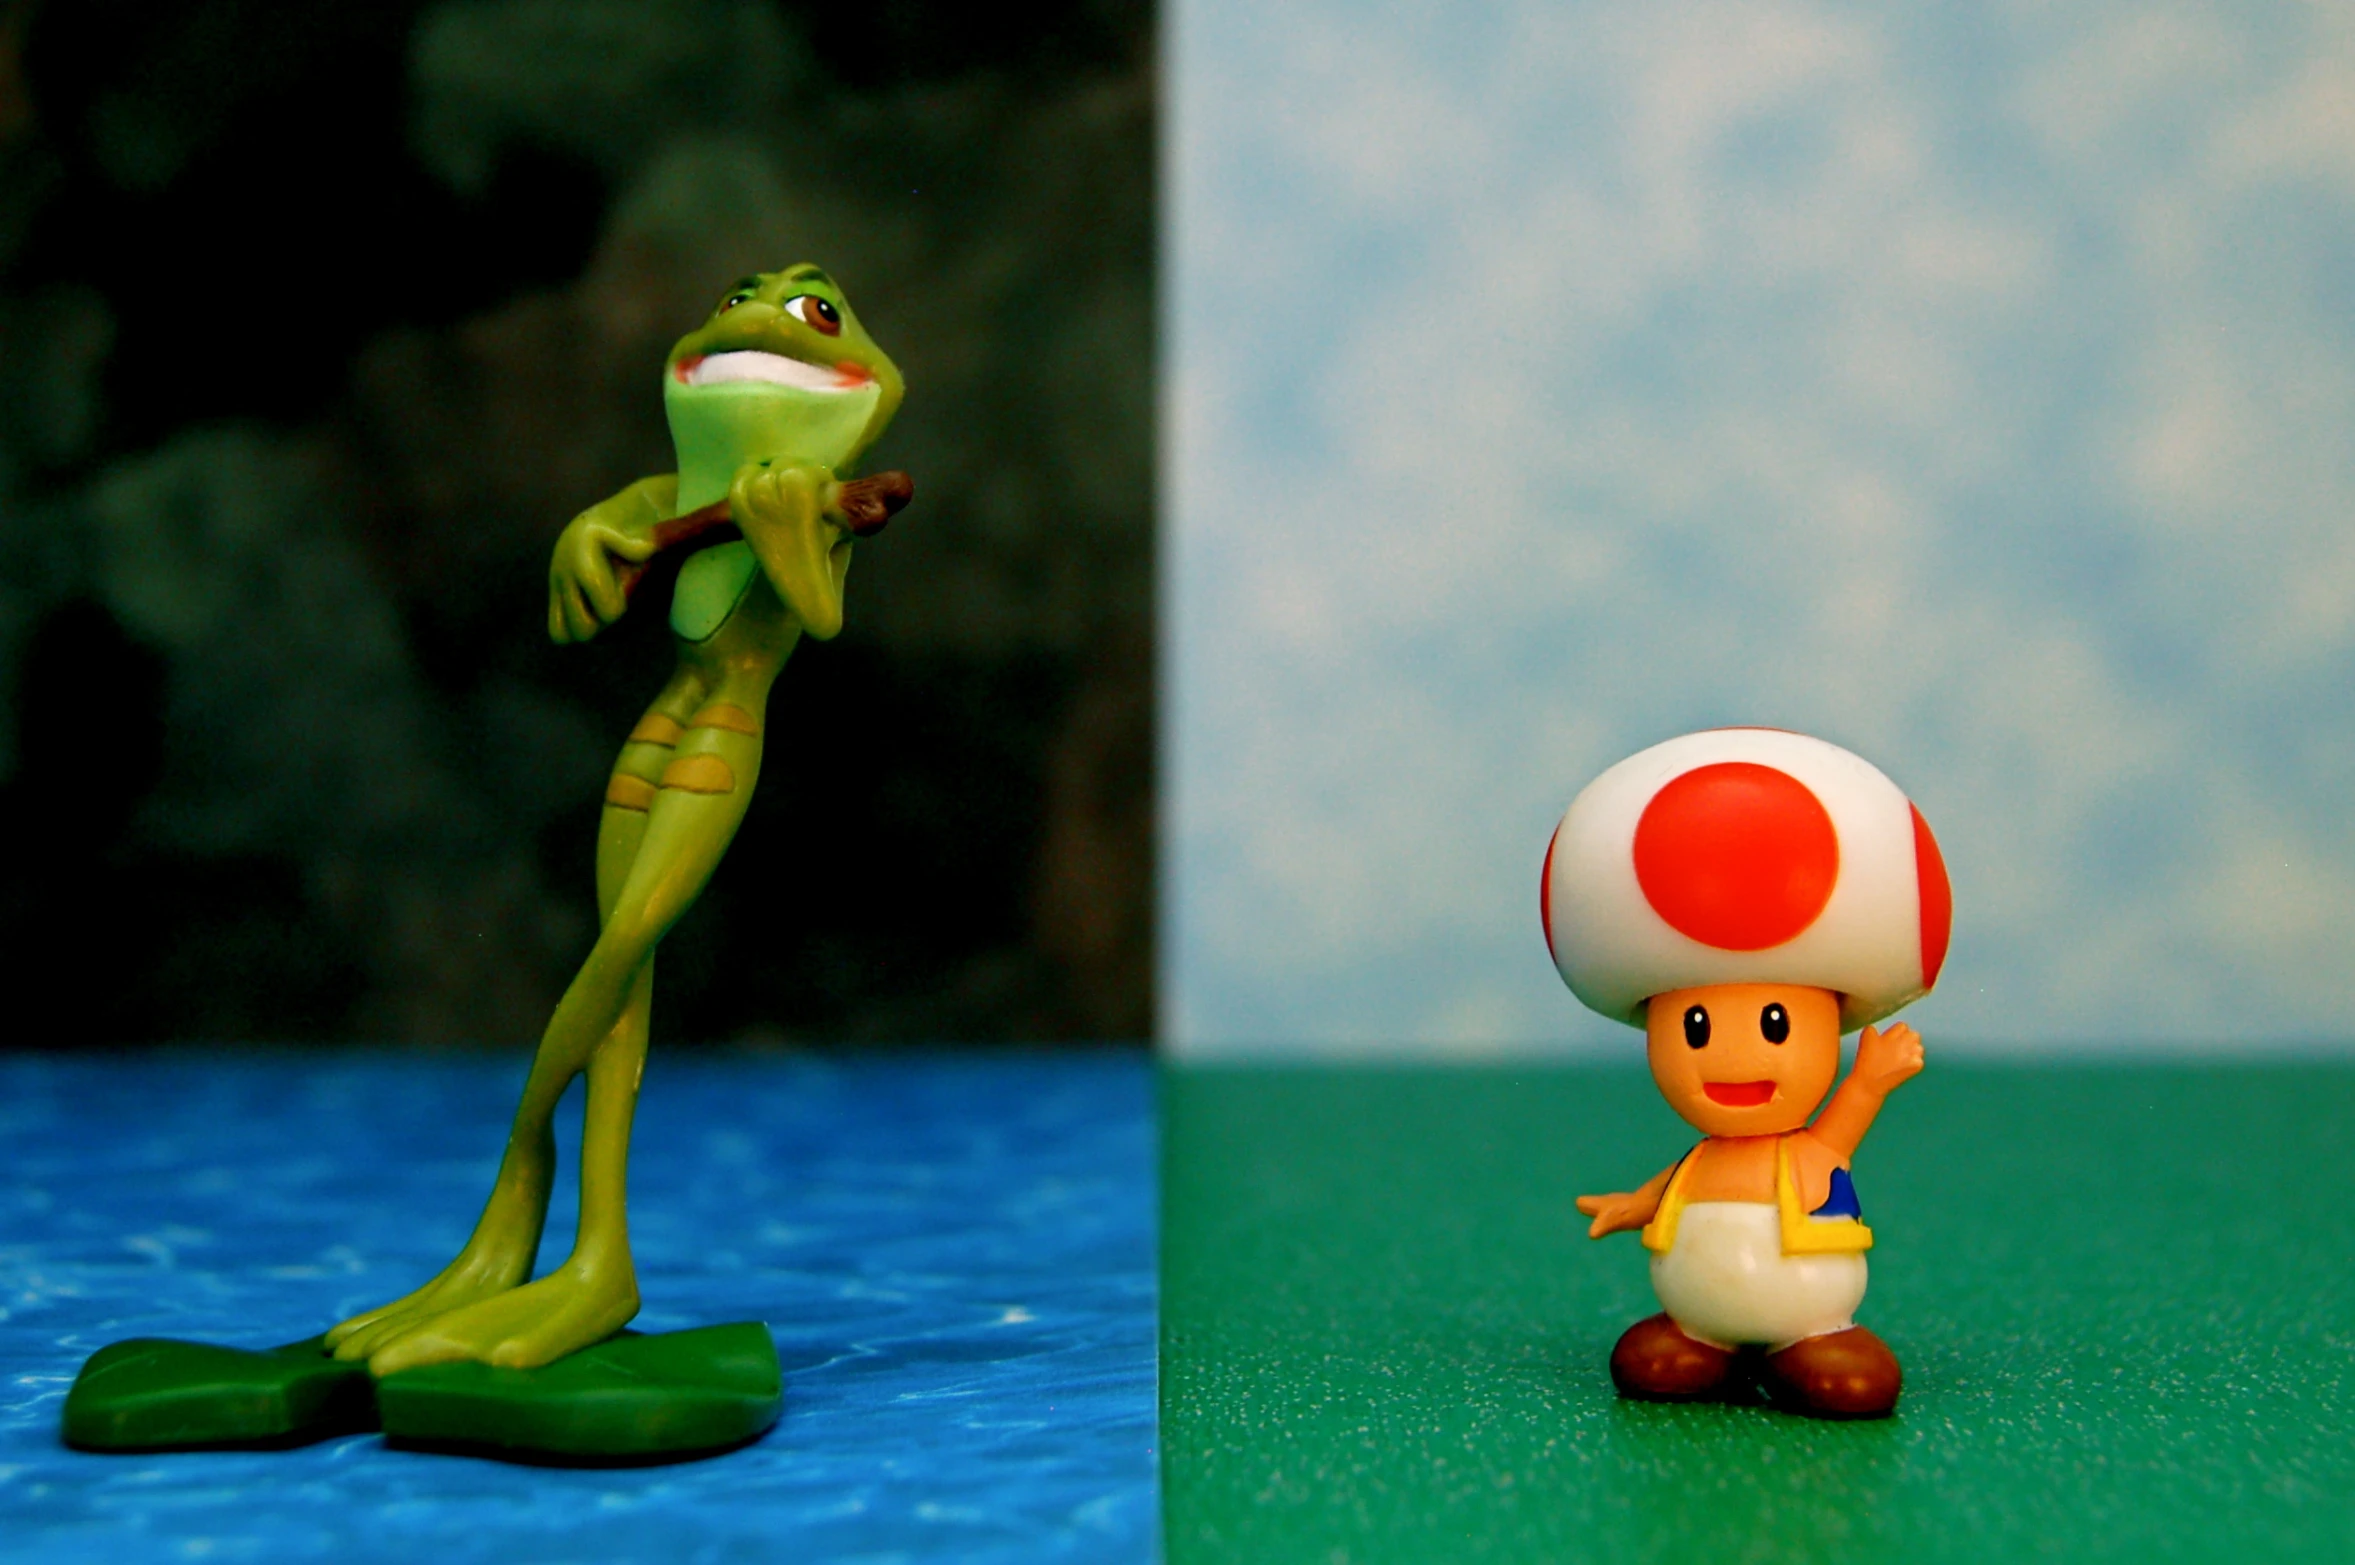 two toy figurines on blue and green background with frog